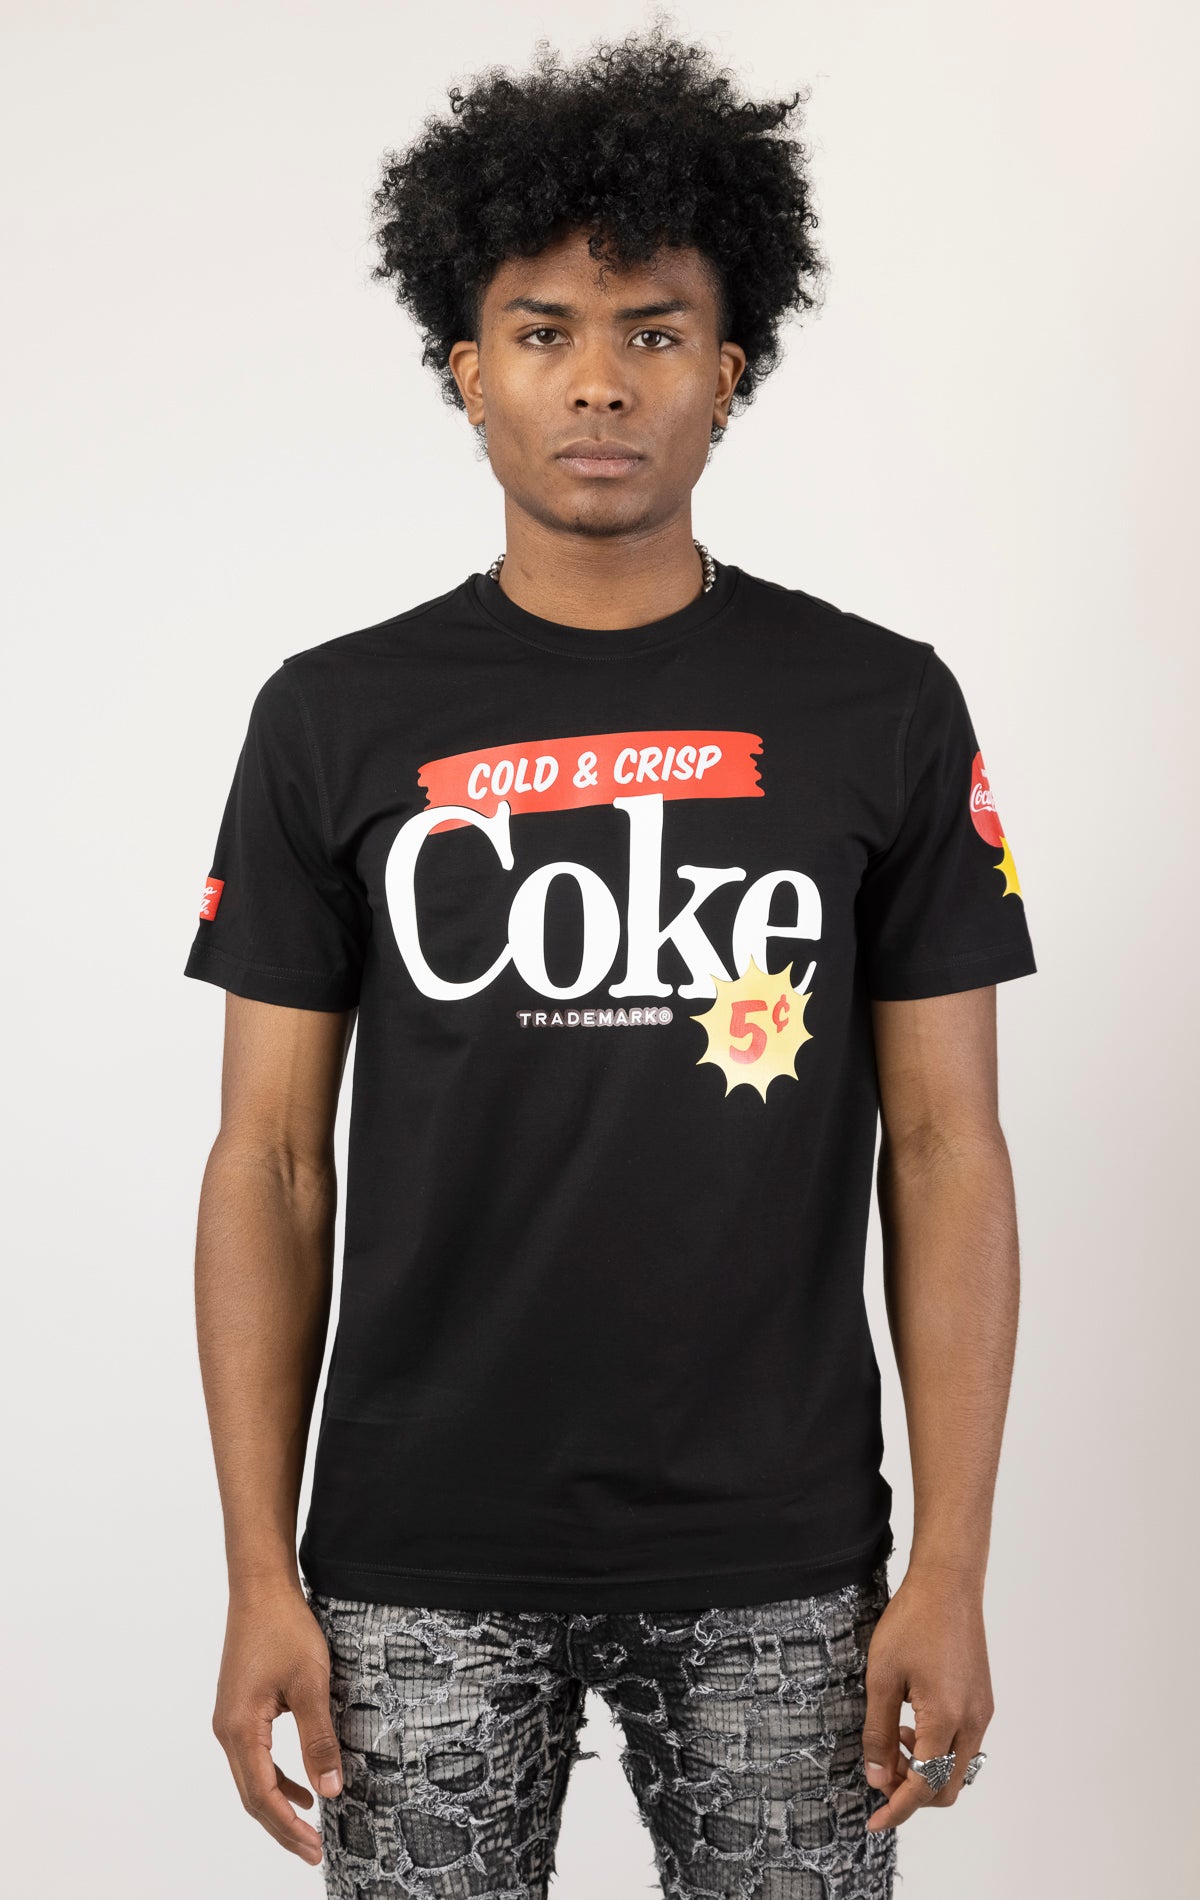 Men's black short-sleeve t-shirt in a classic fit. The shirt features Coca-Cola logos and images screen-printed on both the front and the back. 